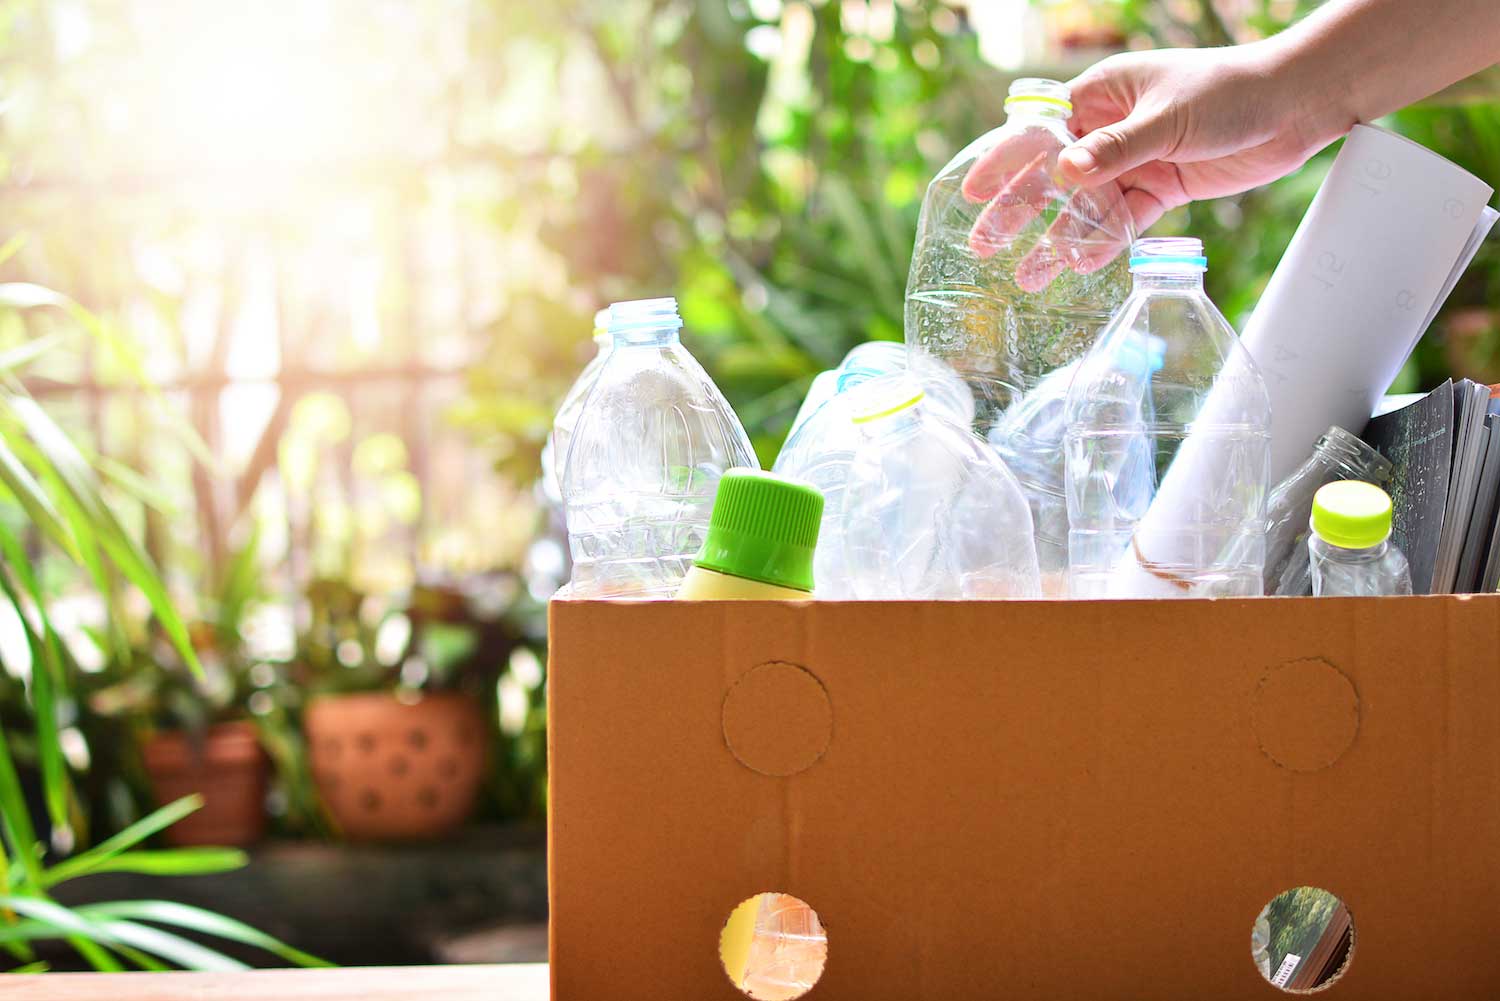 A cardboard box full on plastic bottles to be recycled.